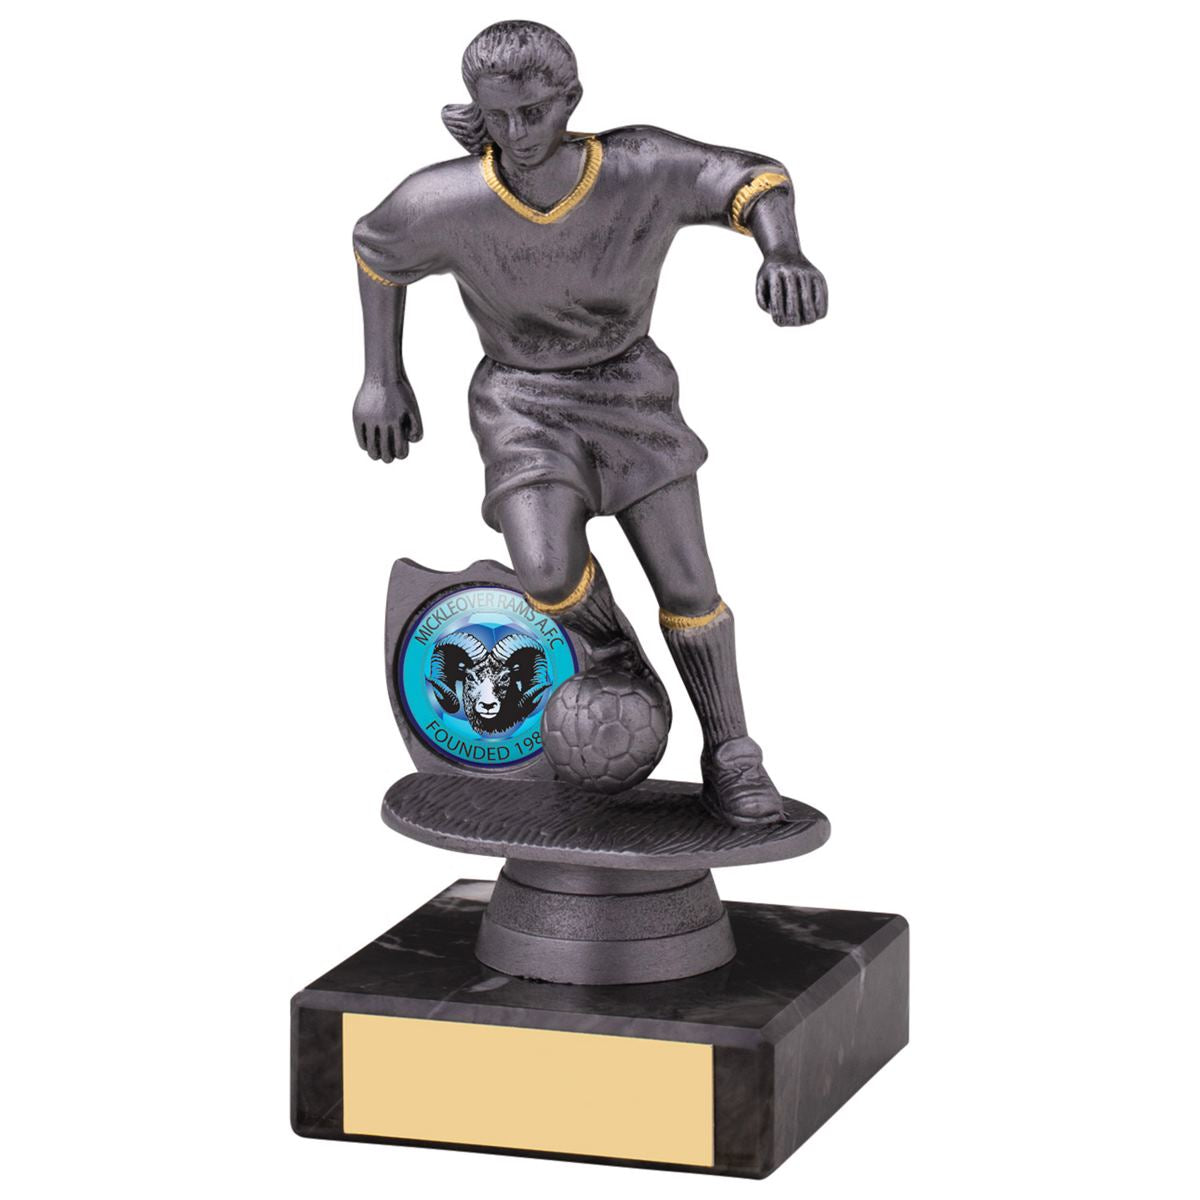 Womens Football Silver Trophies Awards - Pack of 16